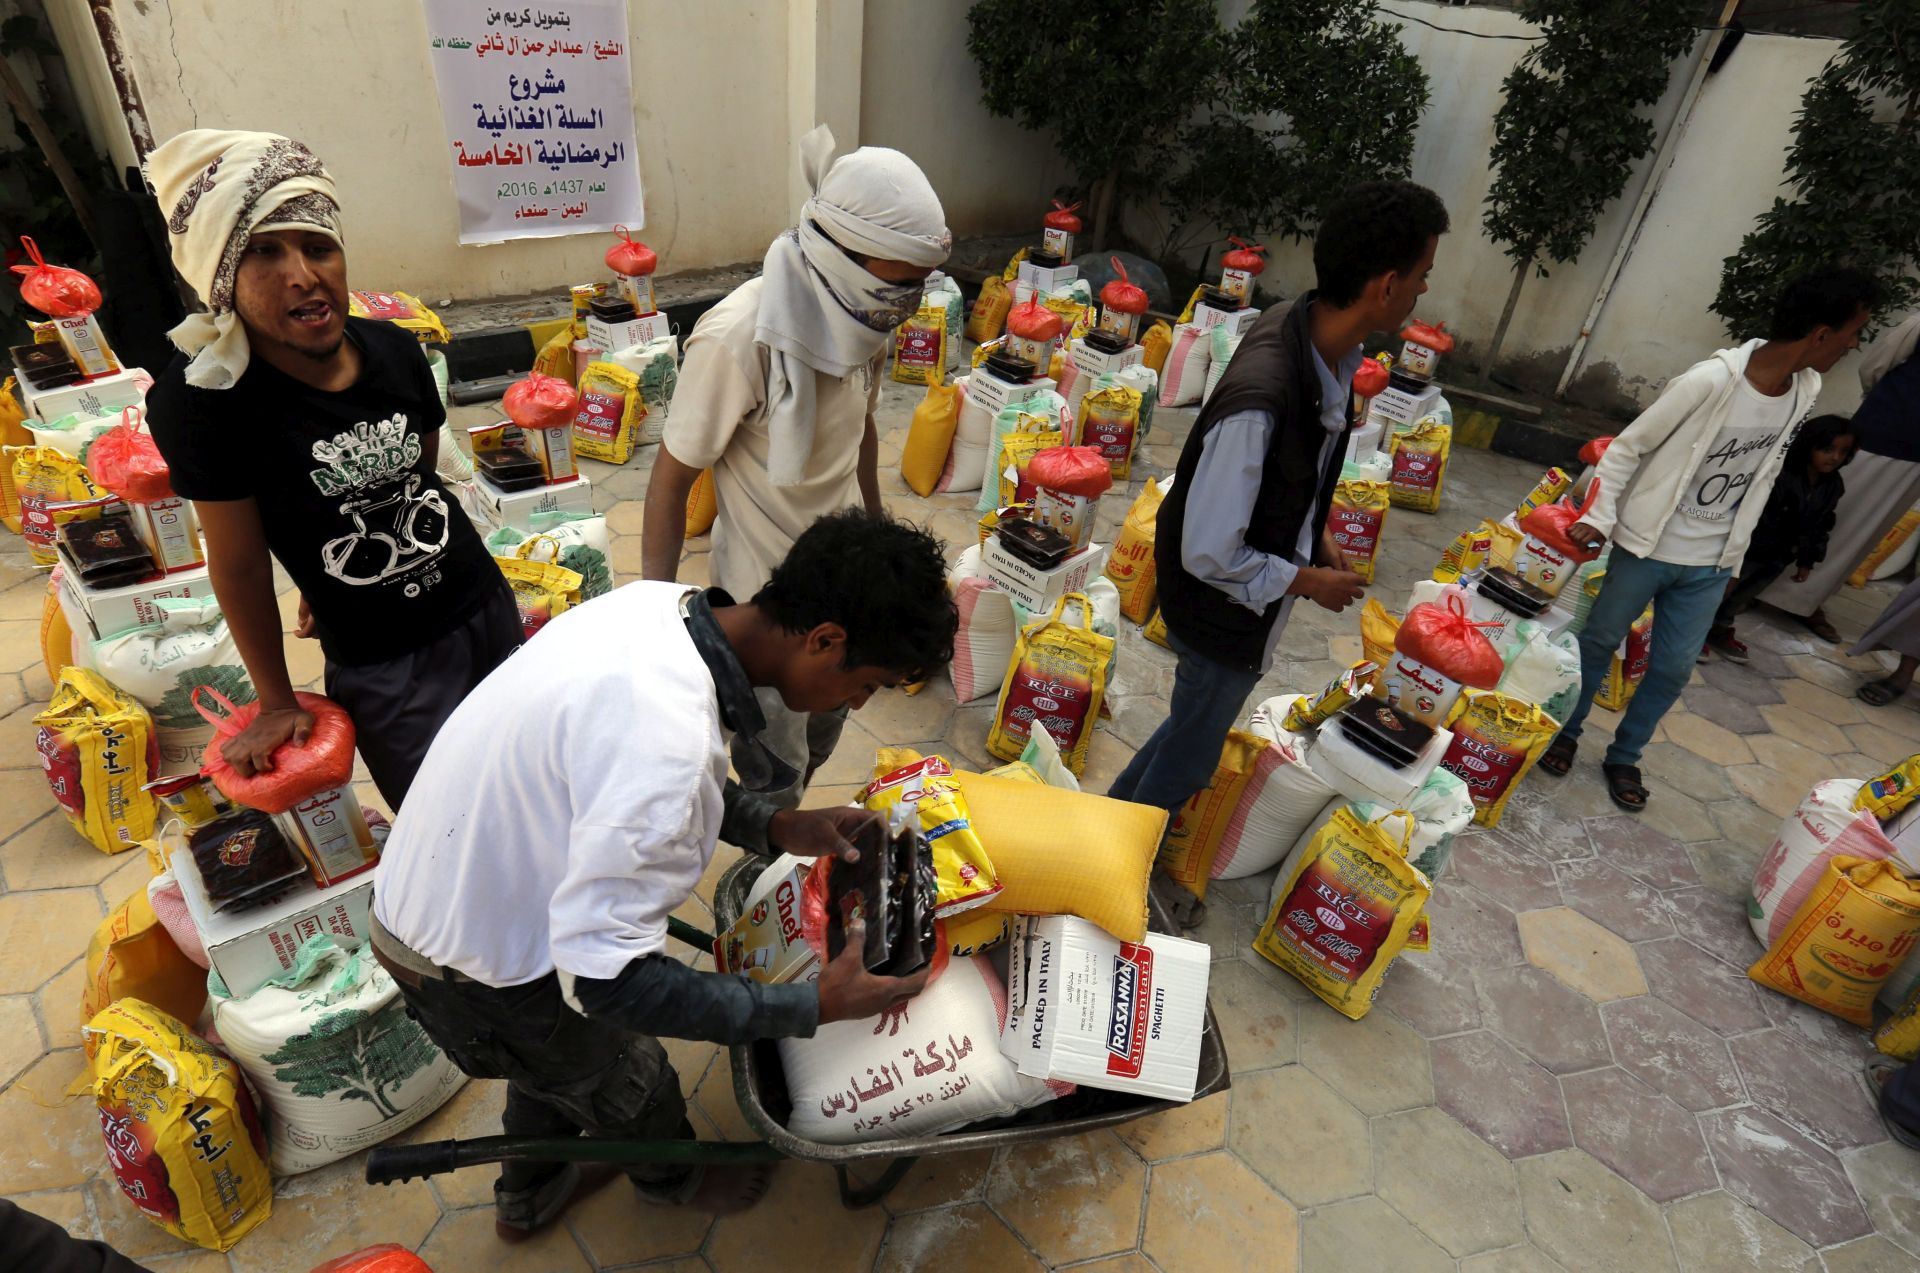 epa05341567 Conflict-affected Yemenis receive food rations provided by a local relief group, in Sanaa, Yemen, 02 June 2016. According to reports, the year-long conflict has worsened Yemen's already poor food security situation, leaving 21 million people of the countrys 24 million-population facing severely shortages of food and vital supplies 2.5 million others forcibly displaced.  EPA/YAHYA ARHAB  EPA/YAHYA ARHAB